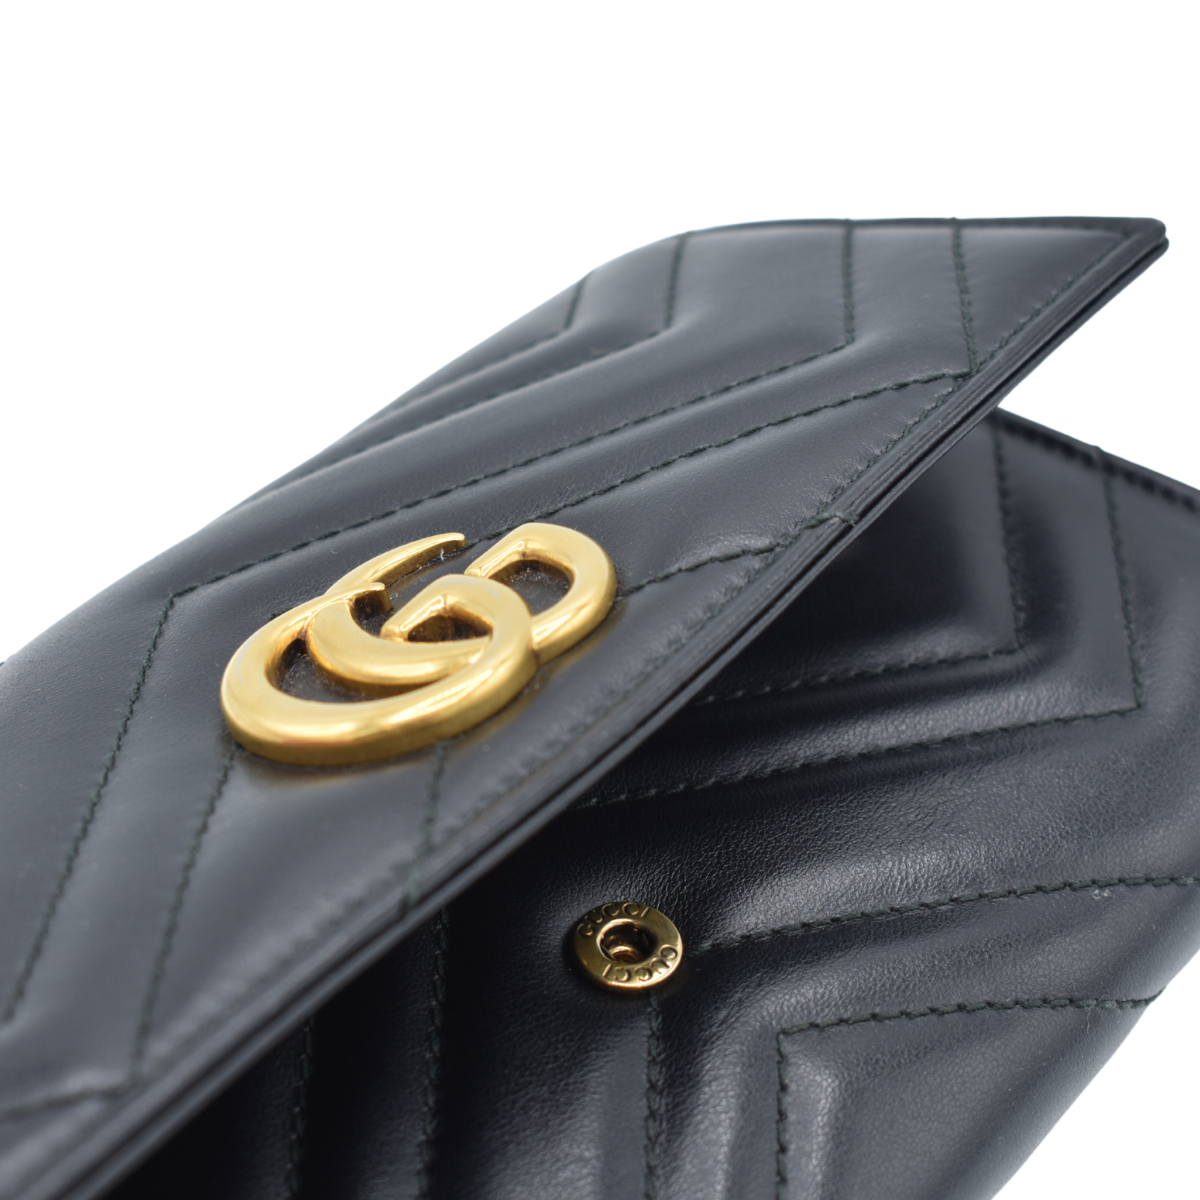 GUCCI Marmont Continental wallet